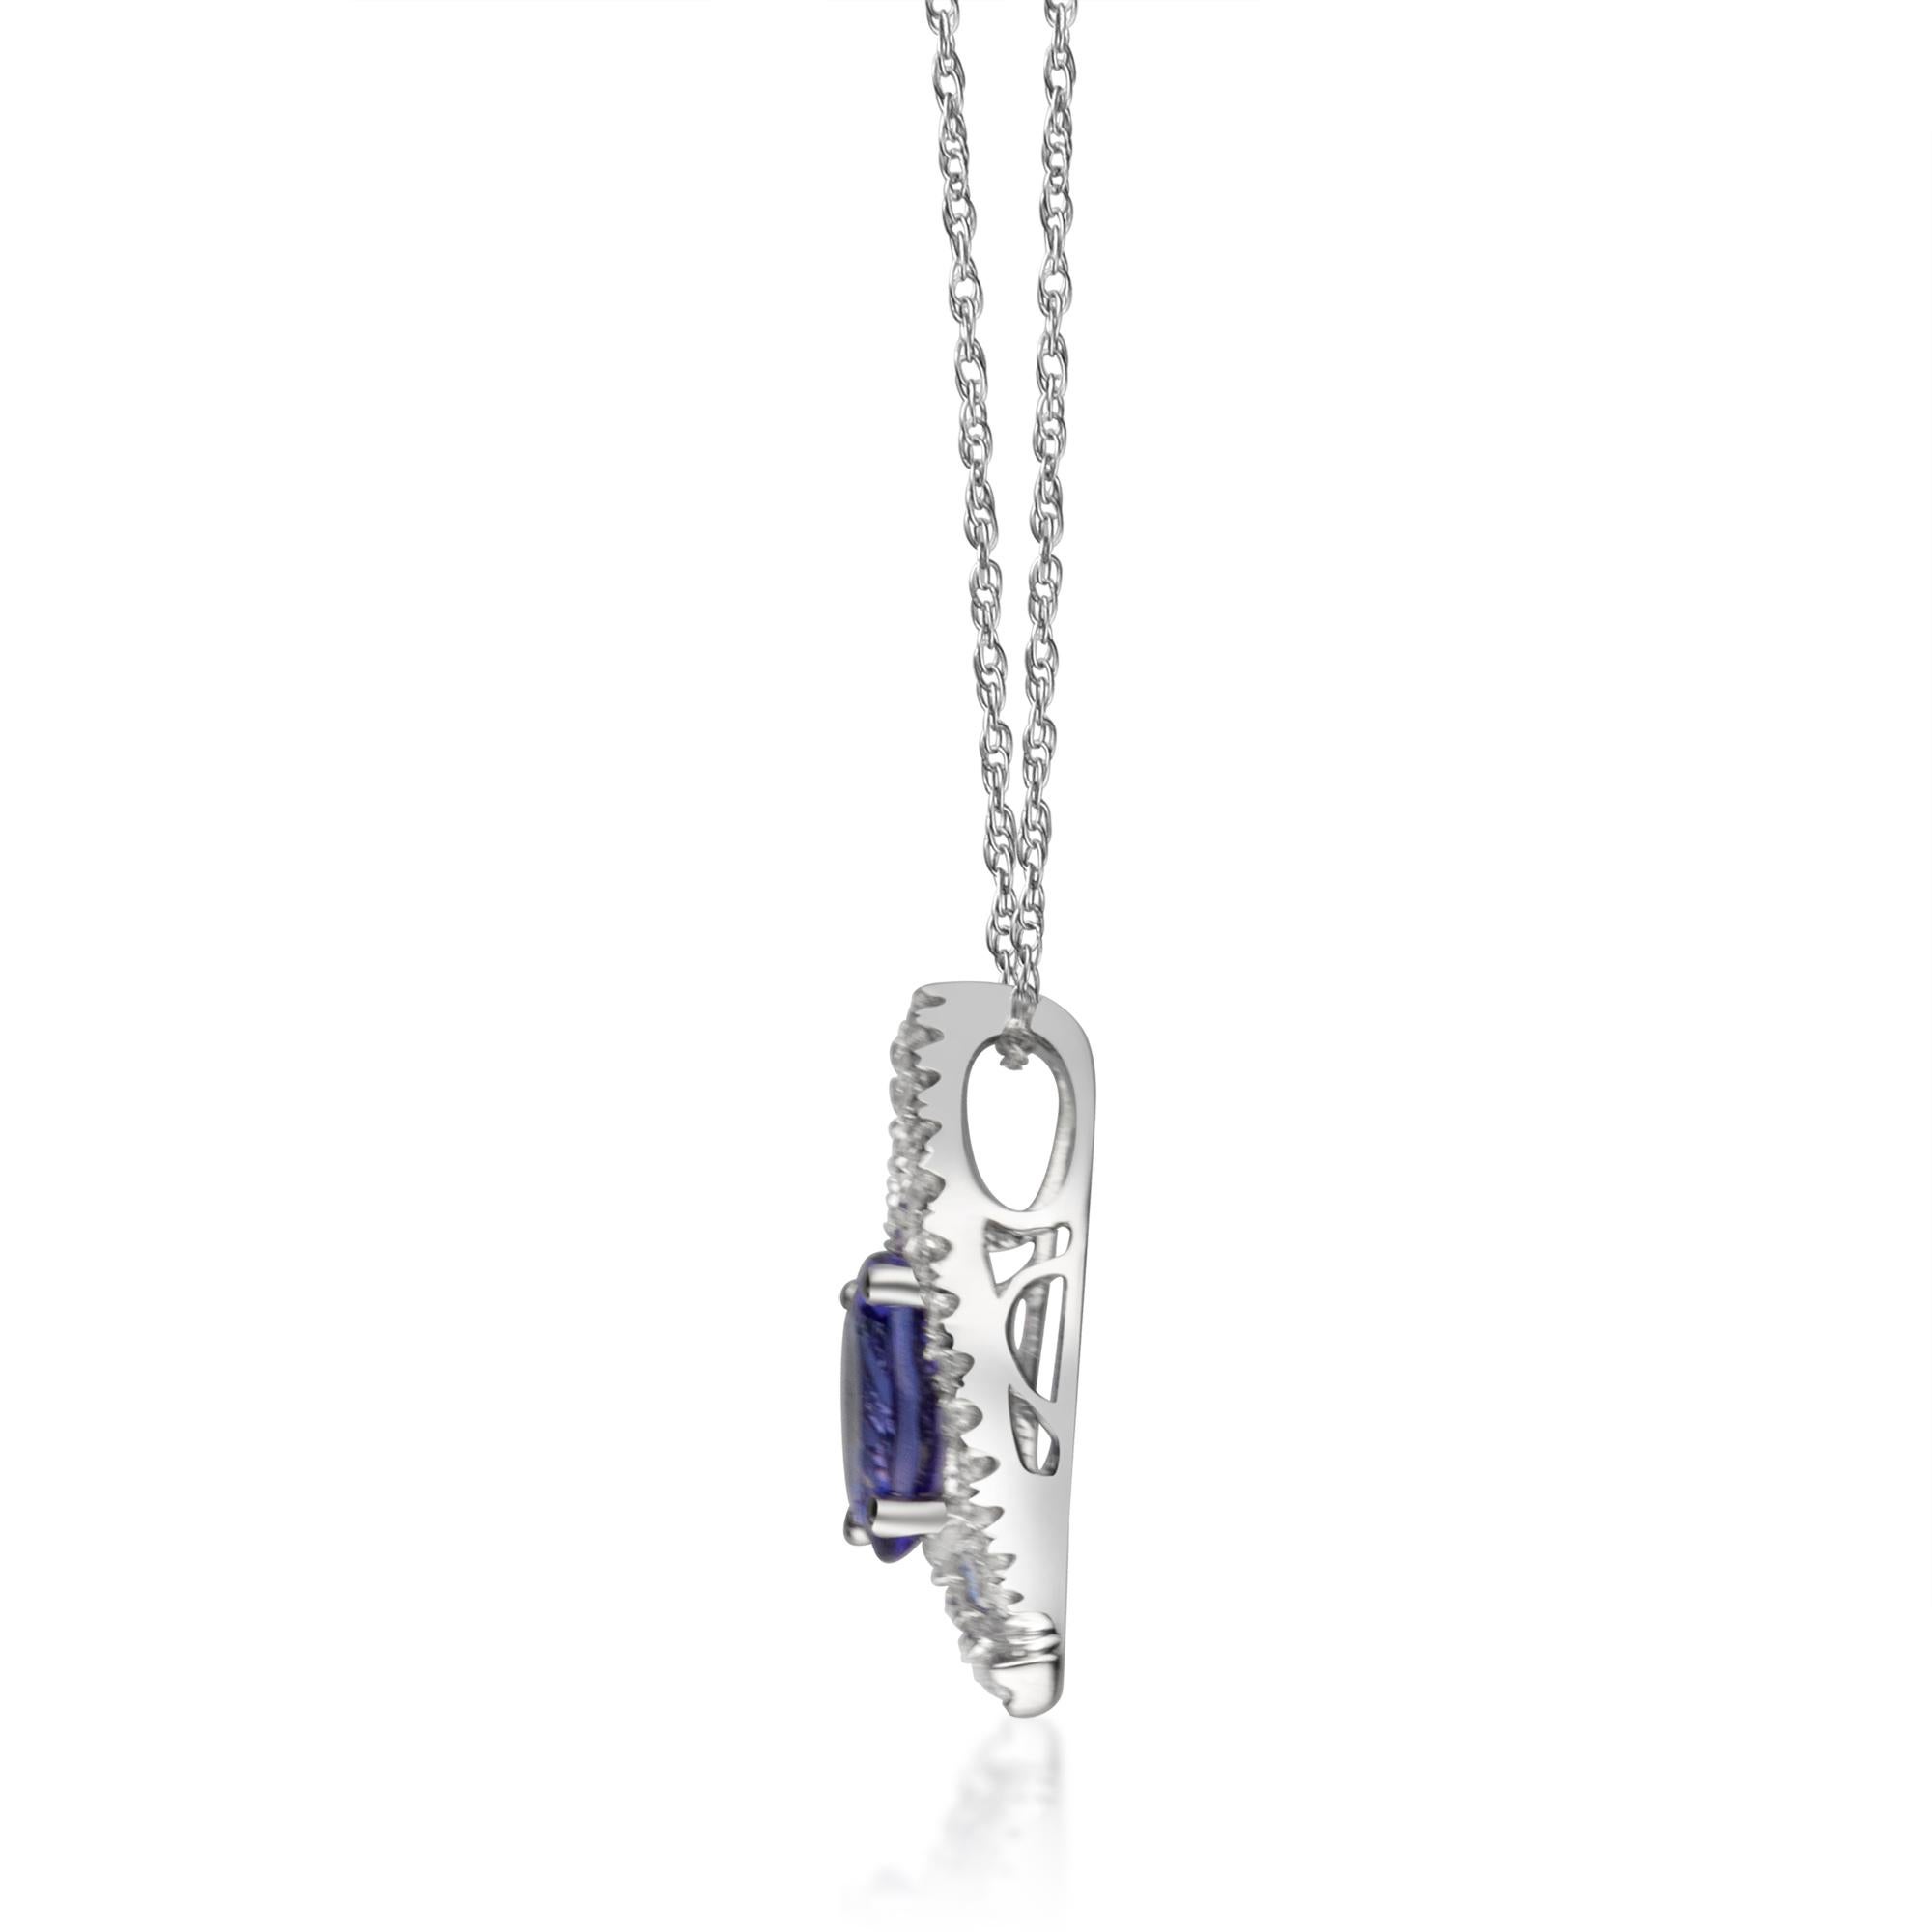 Stunning, timeless and classy eternity Unique Pendant. Decorate yourself in luxury with this Gin & Grace Pendant. The 14k White Gold jewelry boasts Oval-Cut Prong Setting Genuine Tanzanite (1 pcs) 1.24 Carat, along with Natural Round cut white